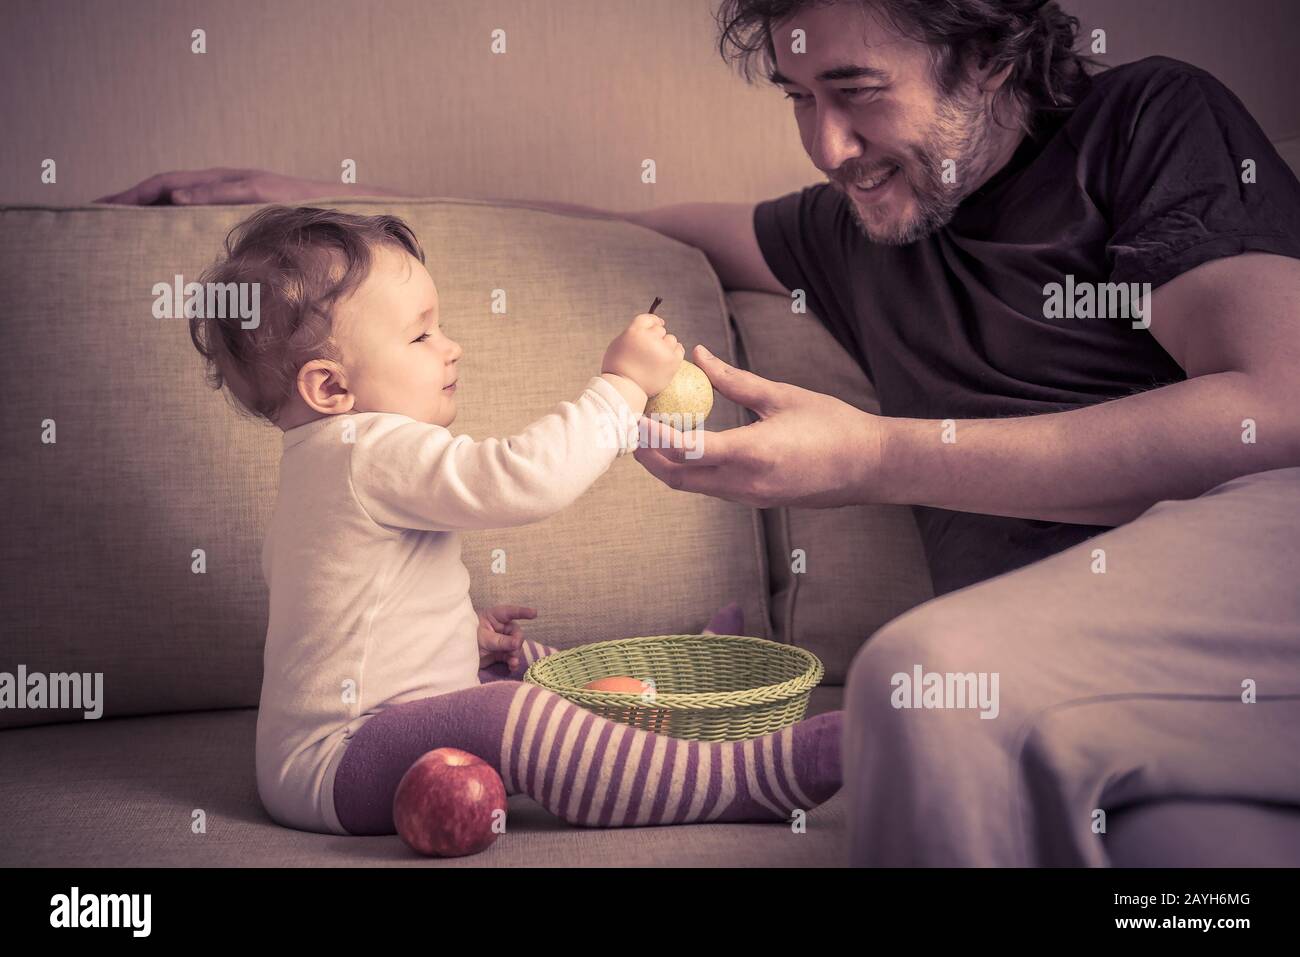 Happy baby girl plays with fruits with her father at home. The one-year child holds a pear in hand. Stock Photo